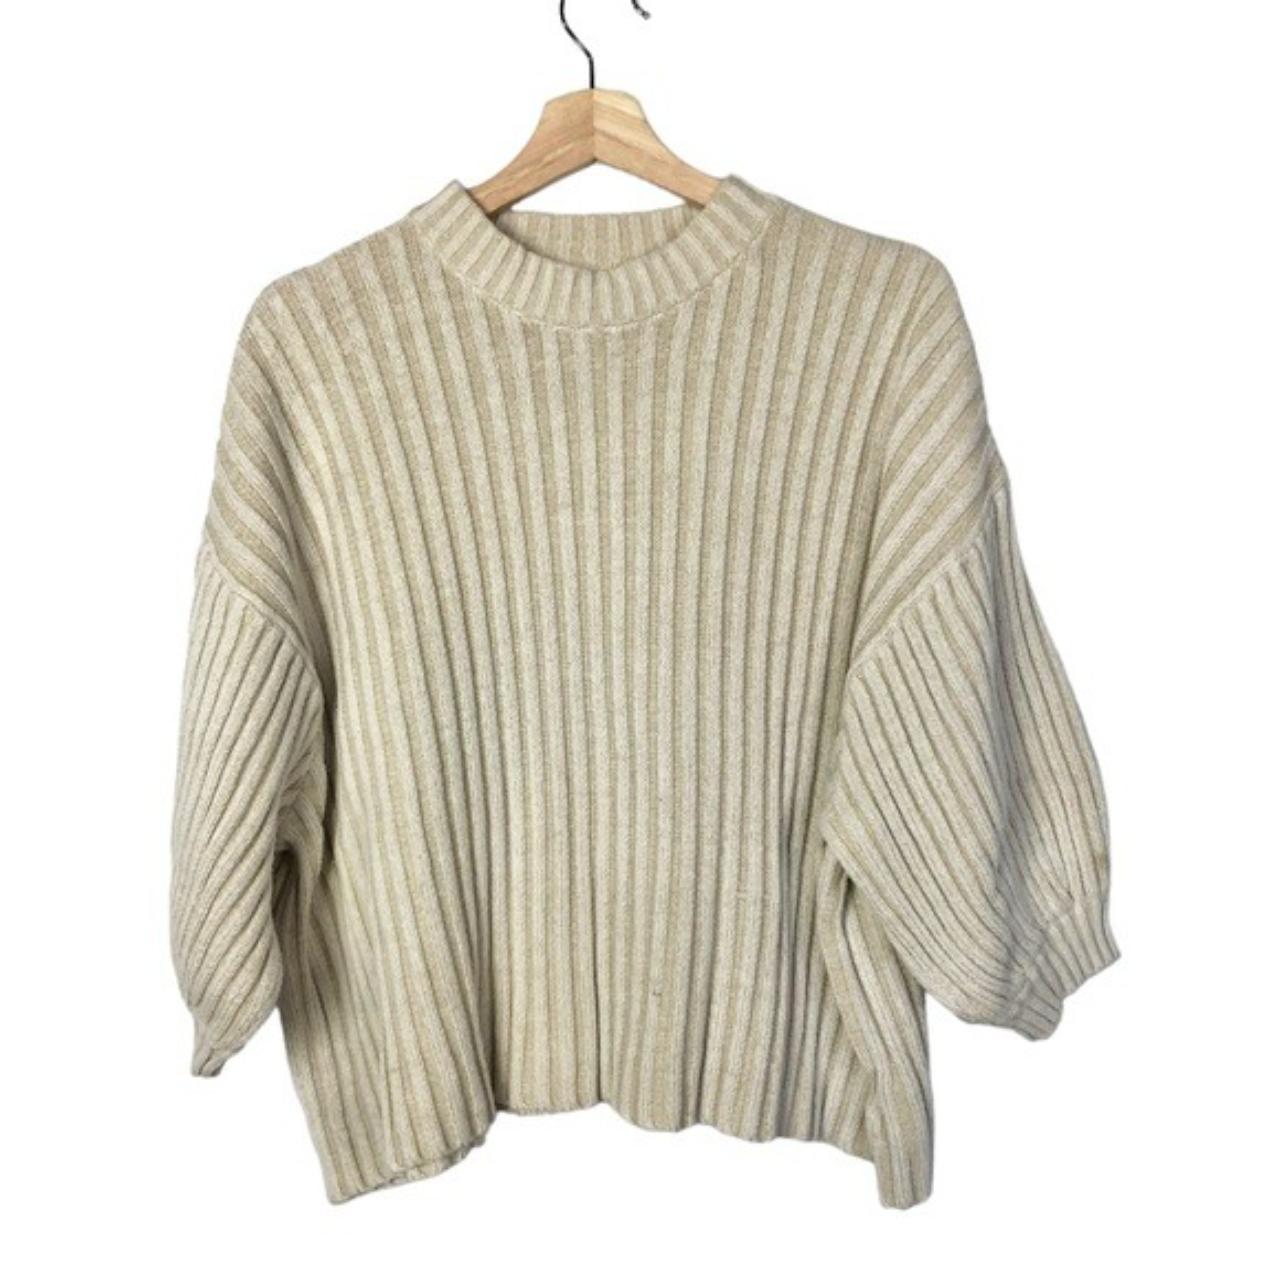 Urban Outfitters UO Beige Wide Ribbed Crewneck... - Depop